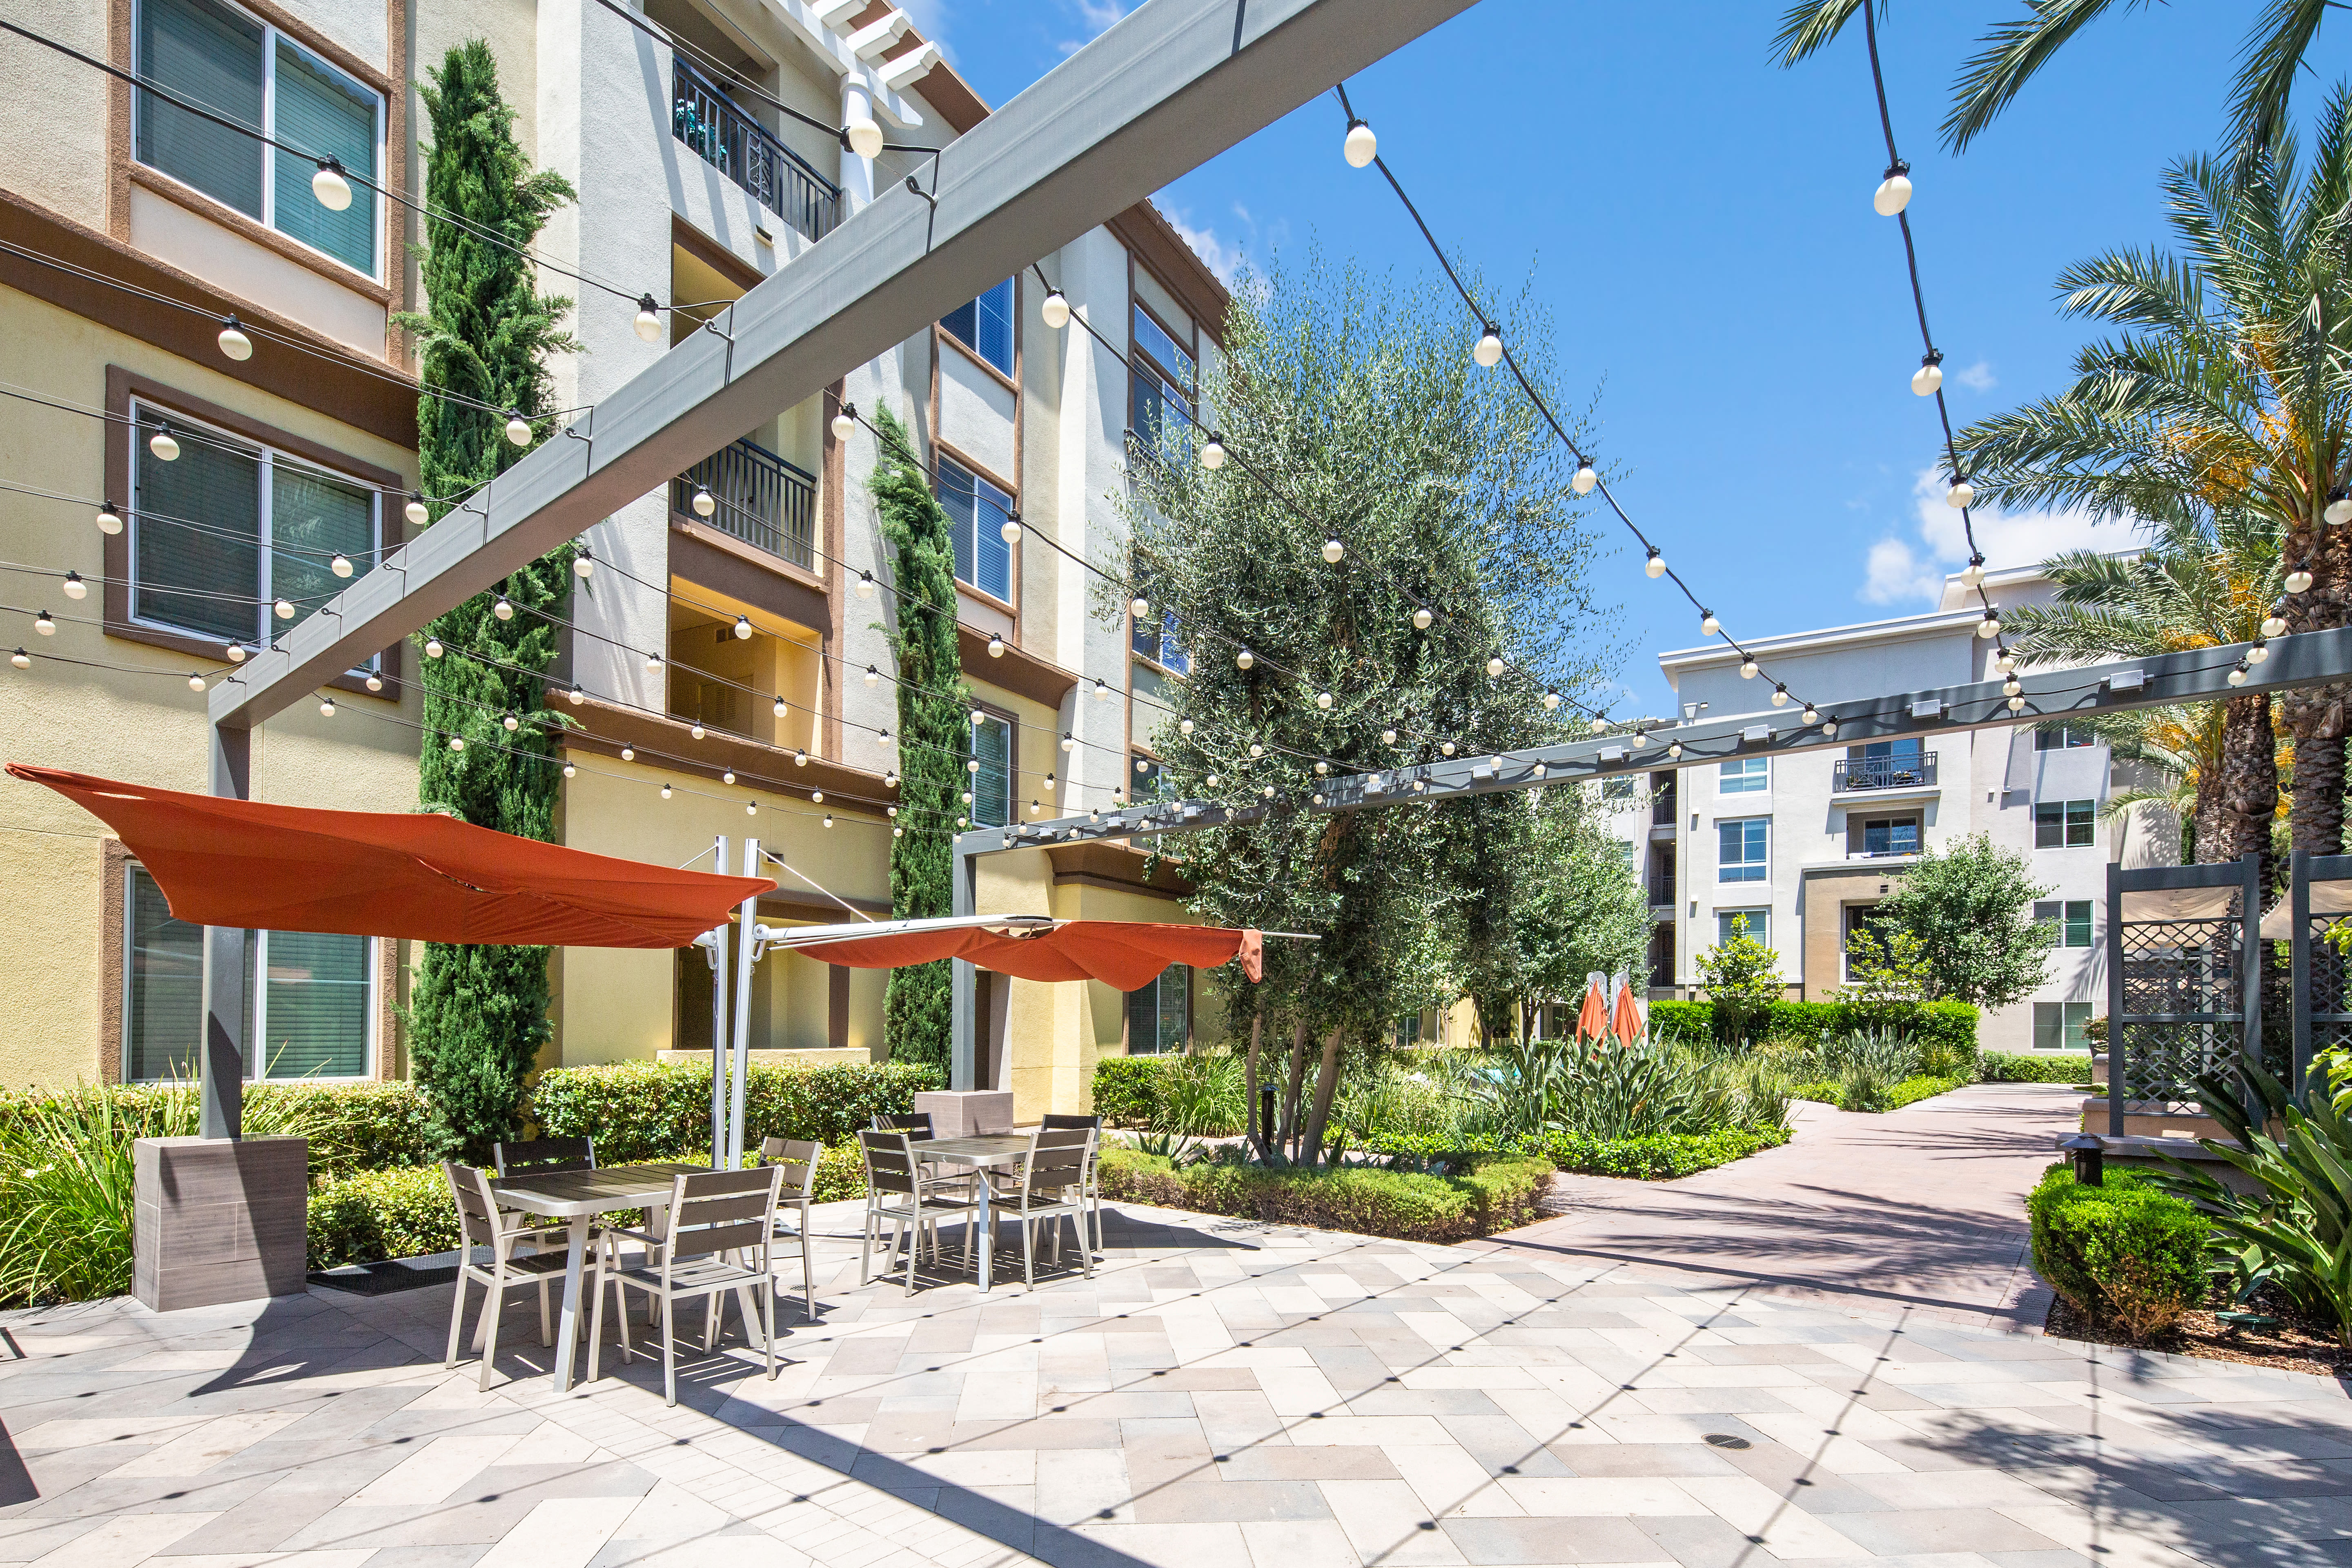 Shaded courtyard seating at The Boulevard Apartment Homes in Woodland Hills, California